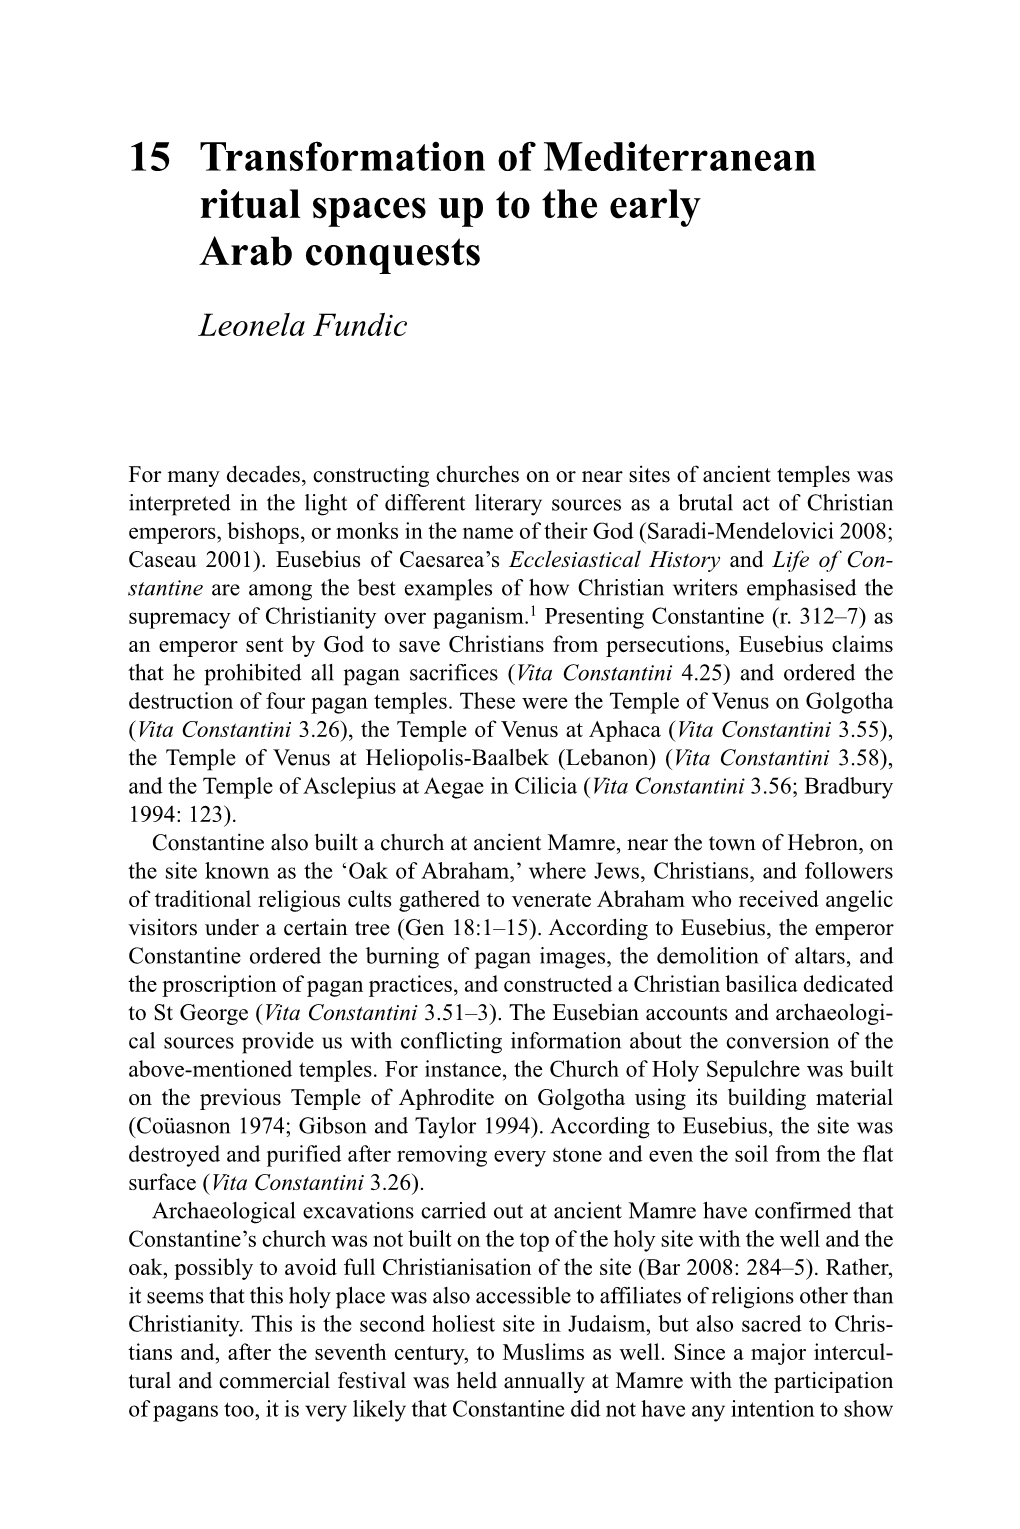 The Revision of Histories and Landscapes in Late Antiquity